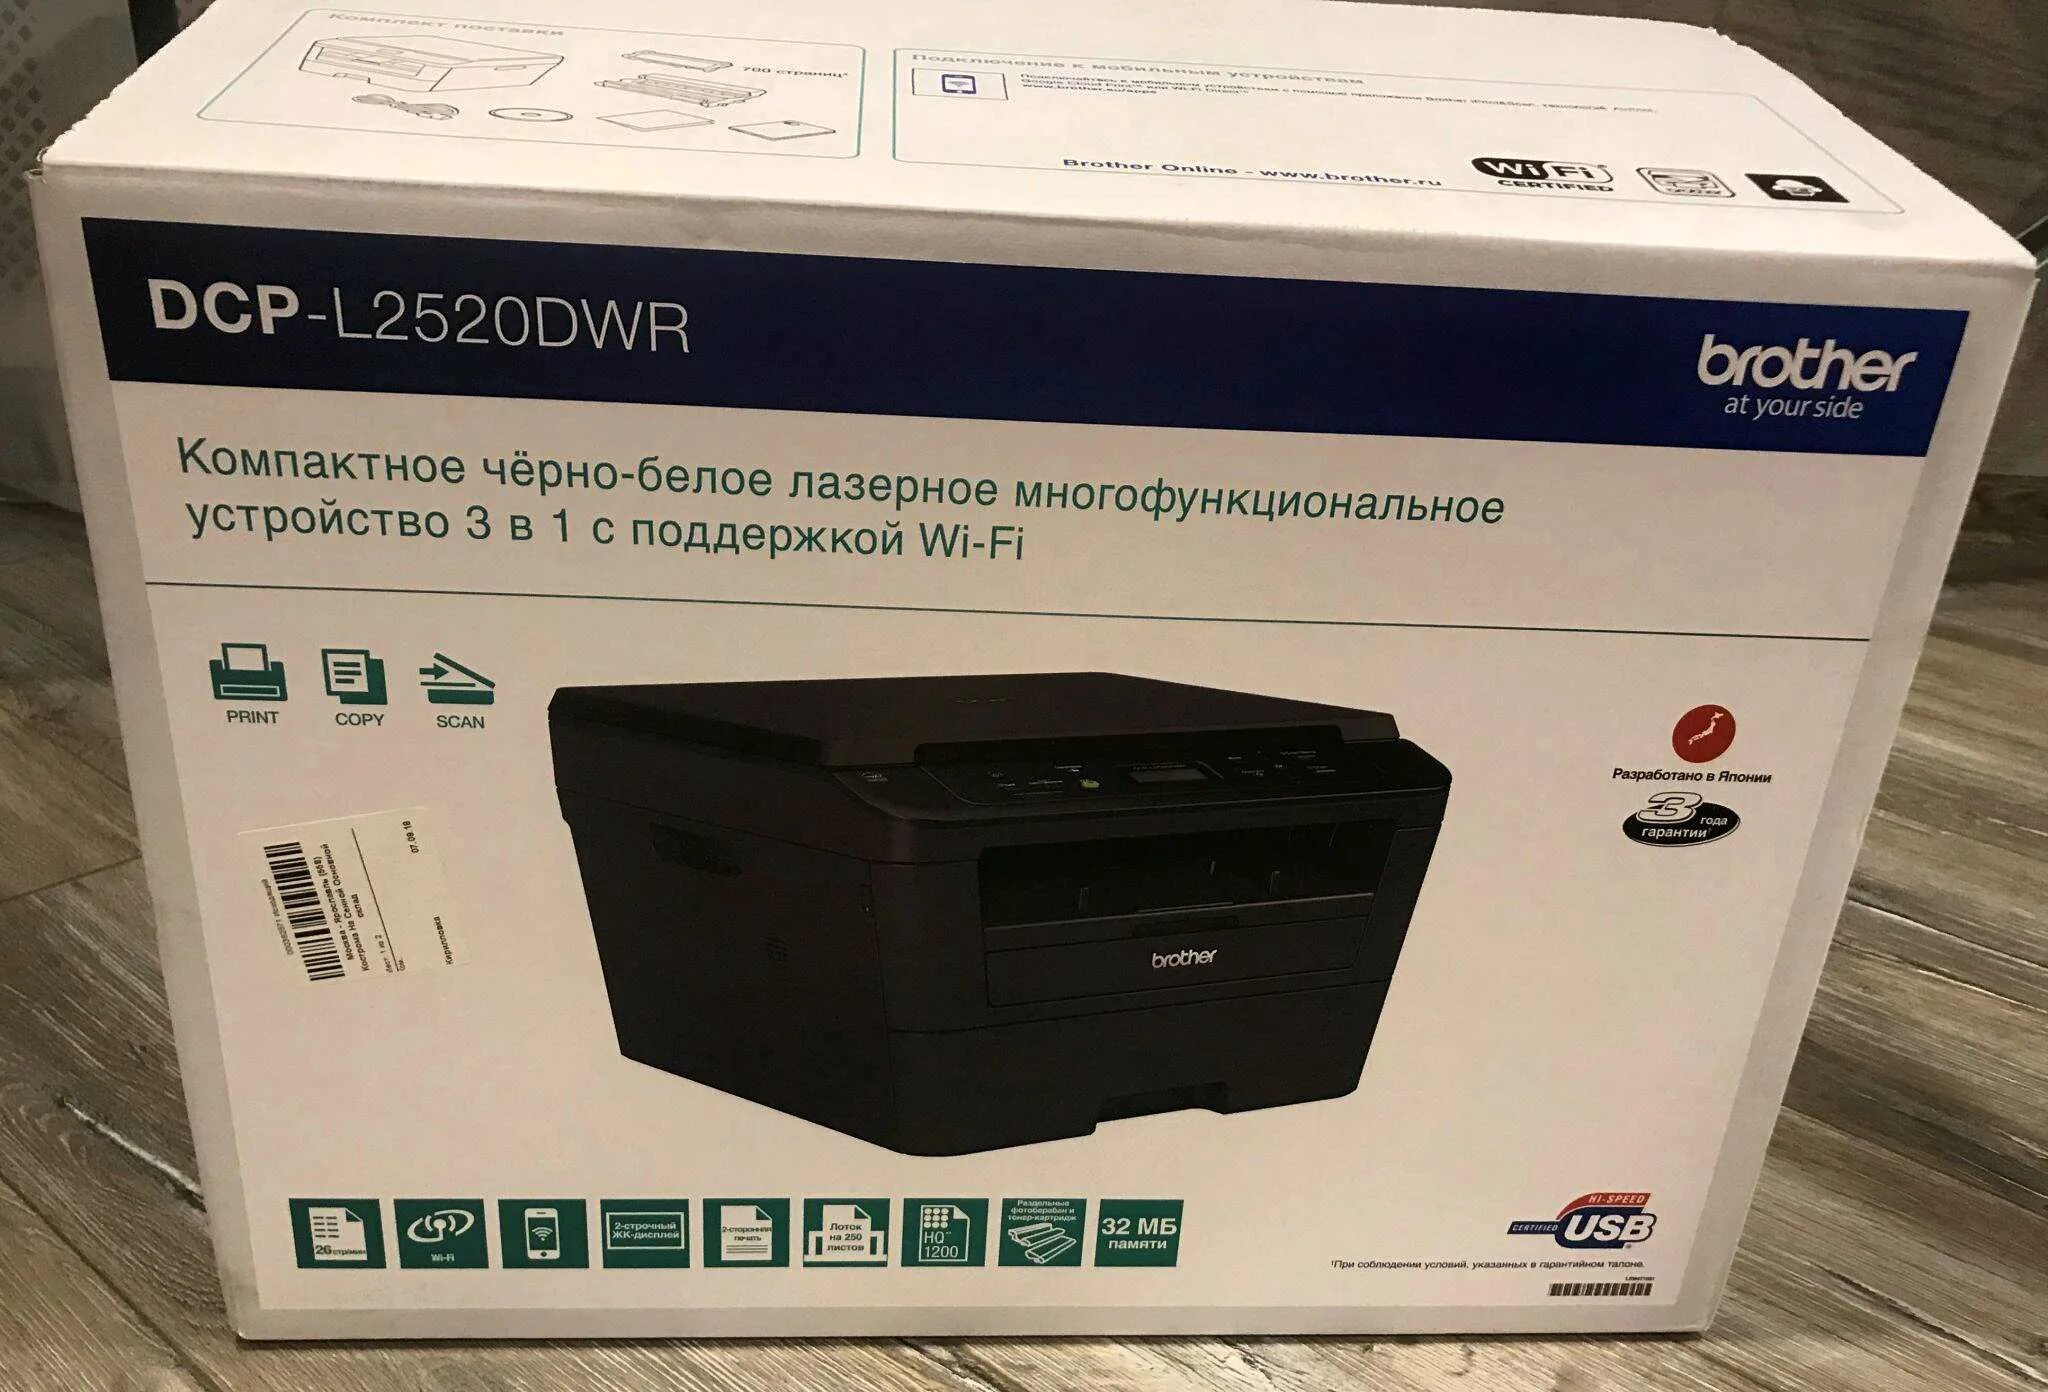 Принтер brother l2520dwr. МФУ brother 2520 DWR. Принтер brother DCP l2520dwr. МФУ лазерное brother DCP-l2520dwr. Габариты МФУ brother DCP-l2520dwr.